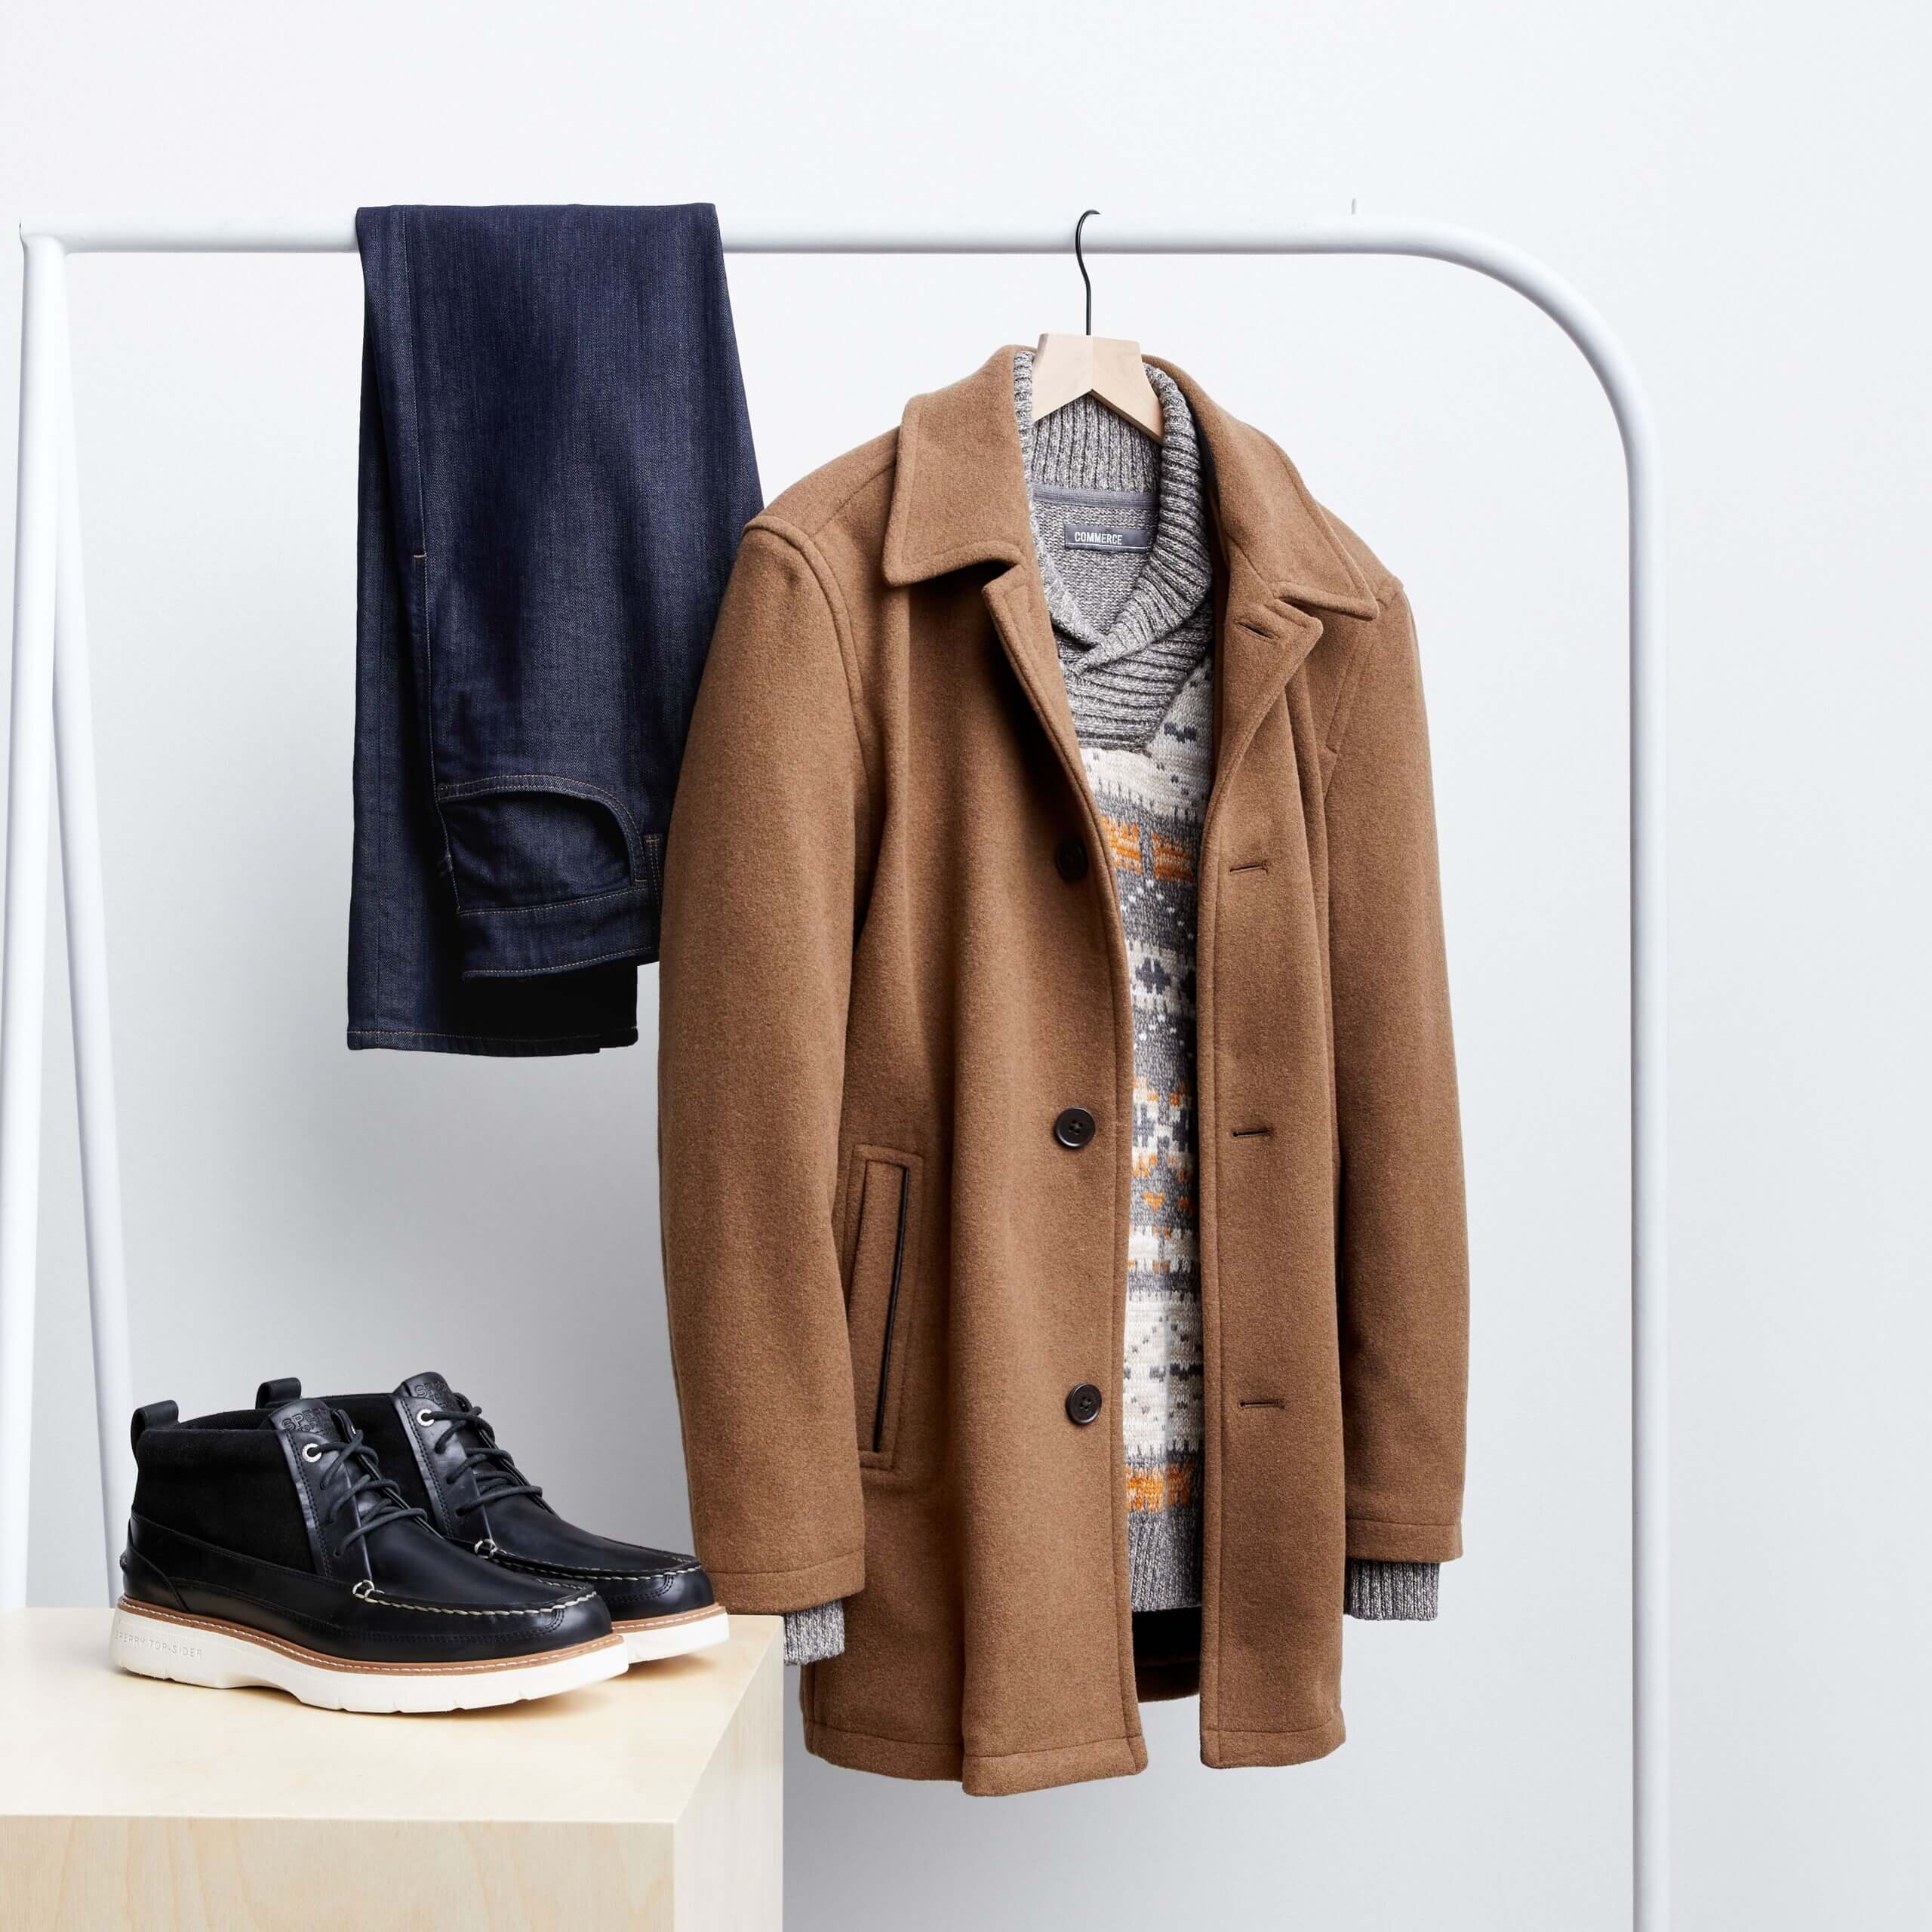 Stitch Fix men's rack image featuring blue jeans folded over rack, brown car coat over grey pullover on hanger, next to black chukka boots on white block.